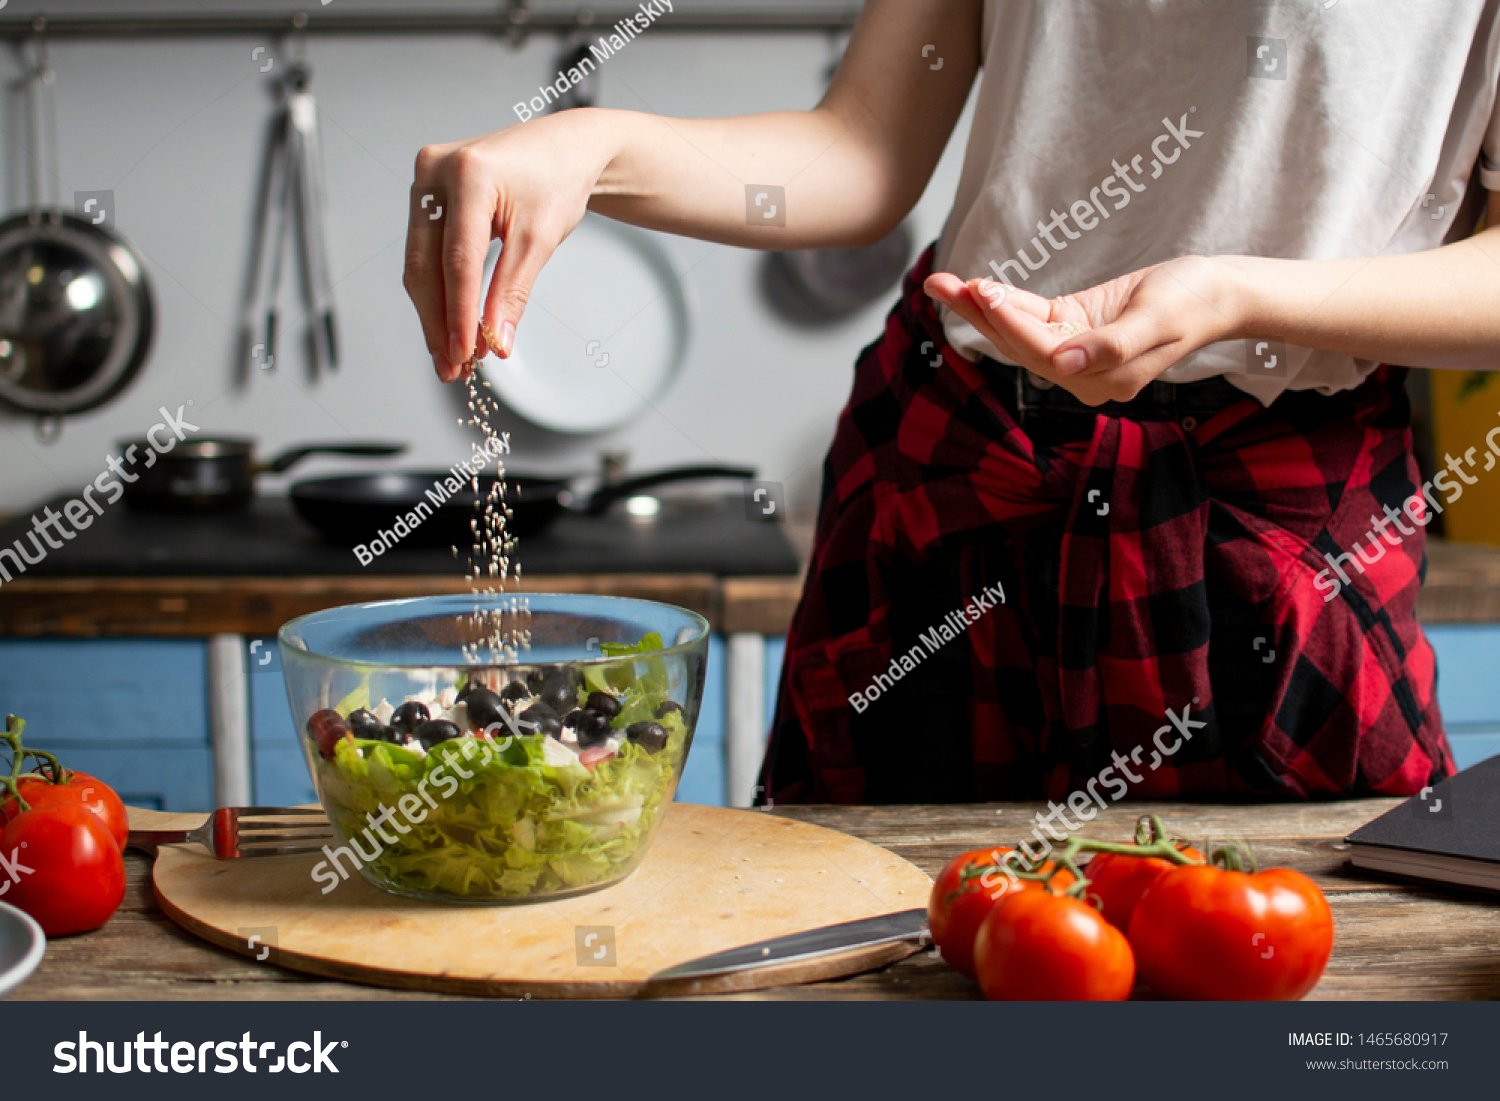 young cheerful girl prepares a vegetarian salad in the kitchen, she salts and adds spices, the process of preparing healthy food #1465680917